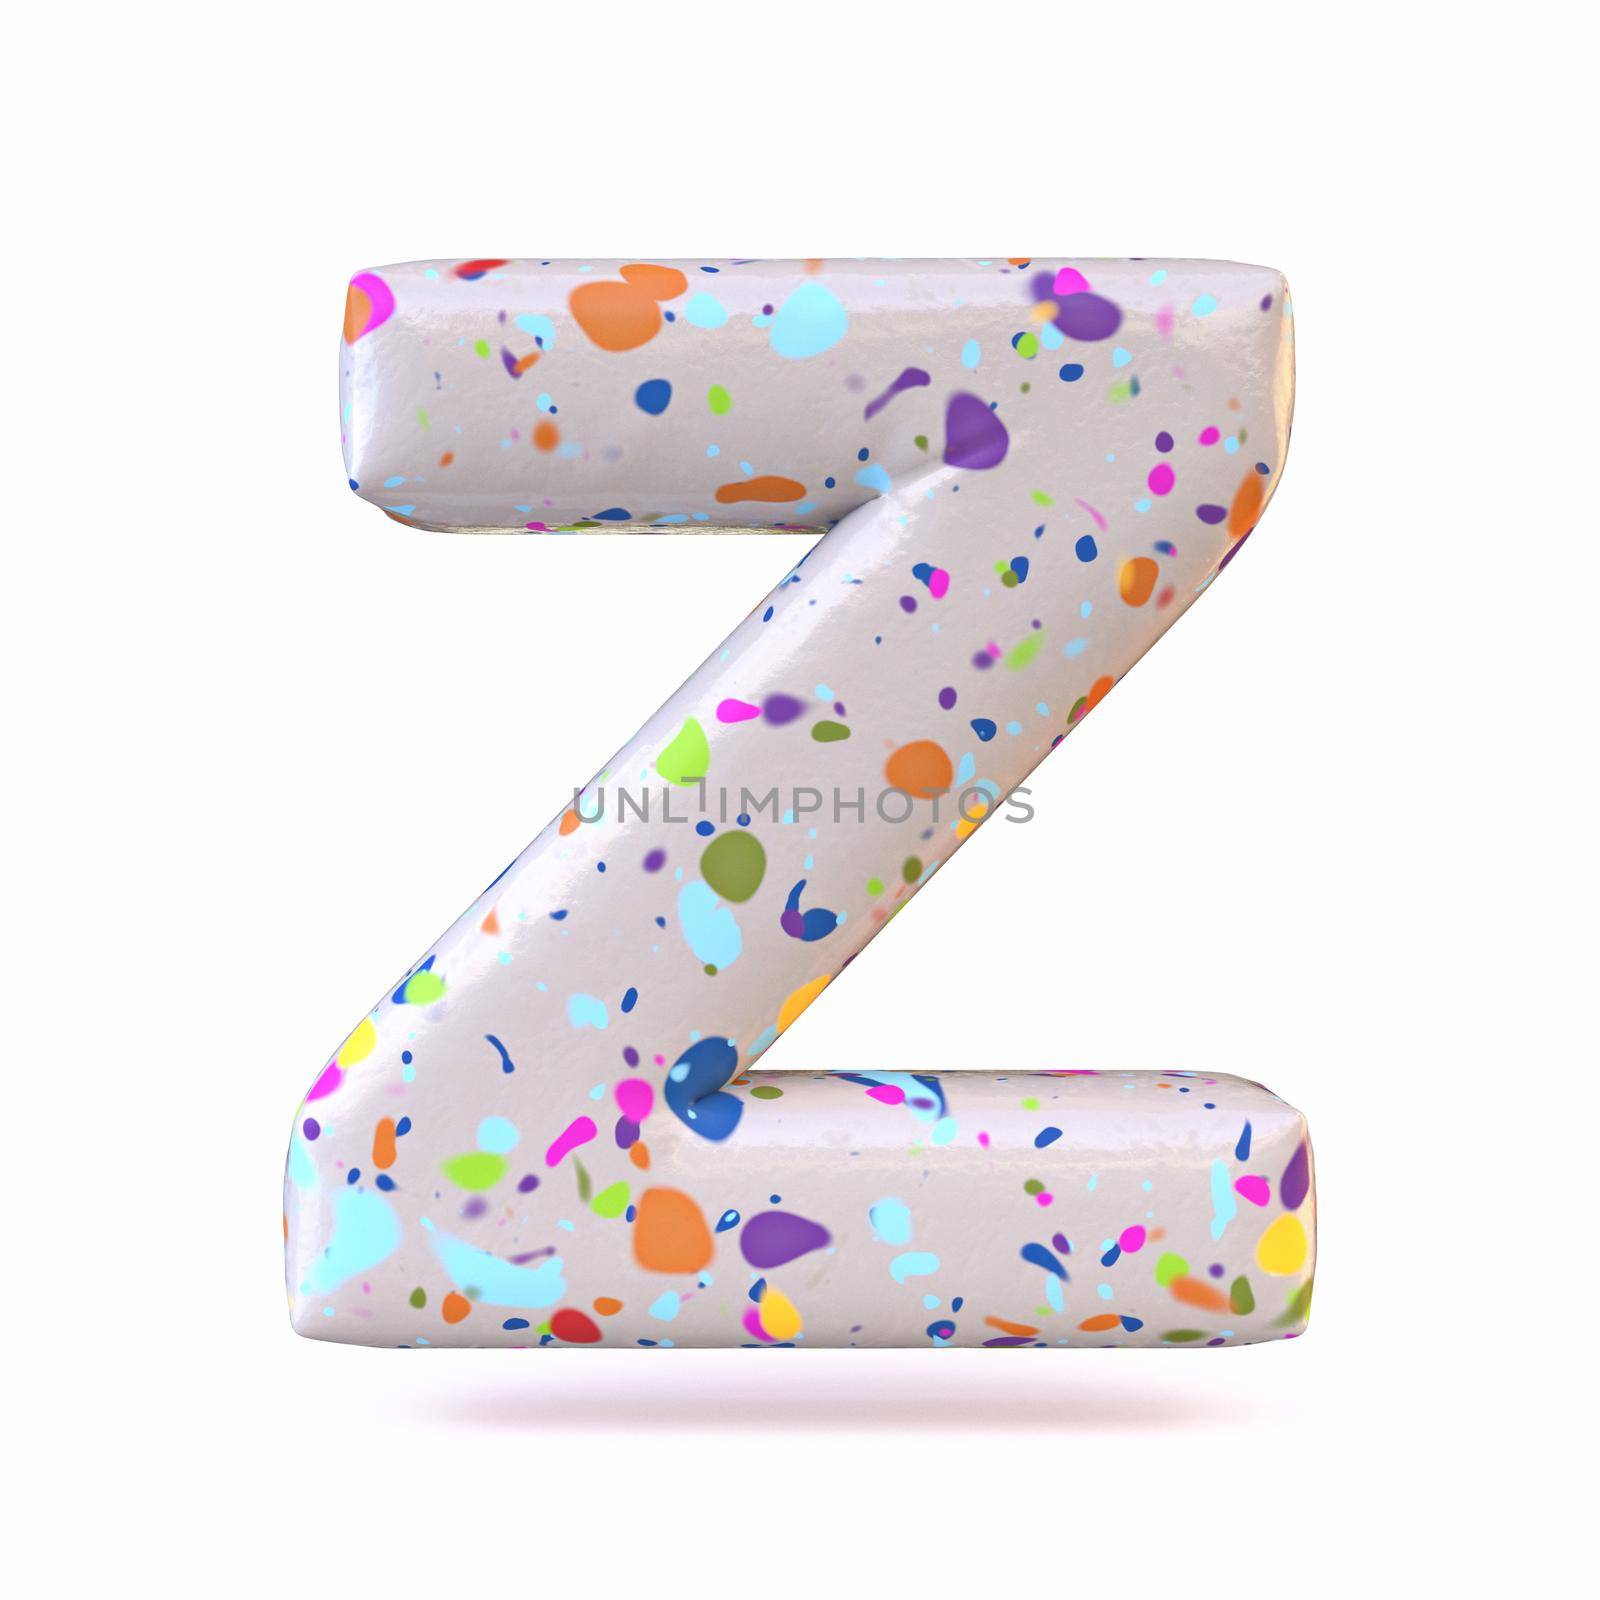 Colorful terrazzo pattern font Letter Z 3D render illustration isolated on white background